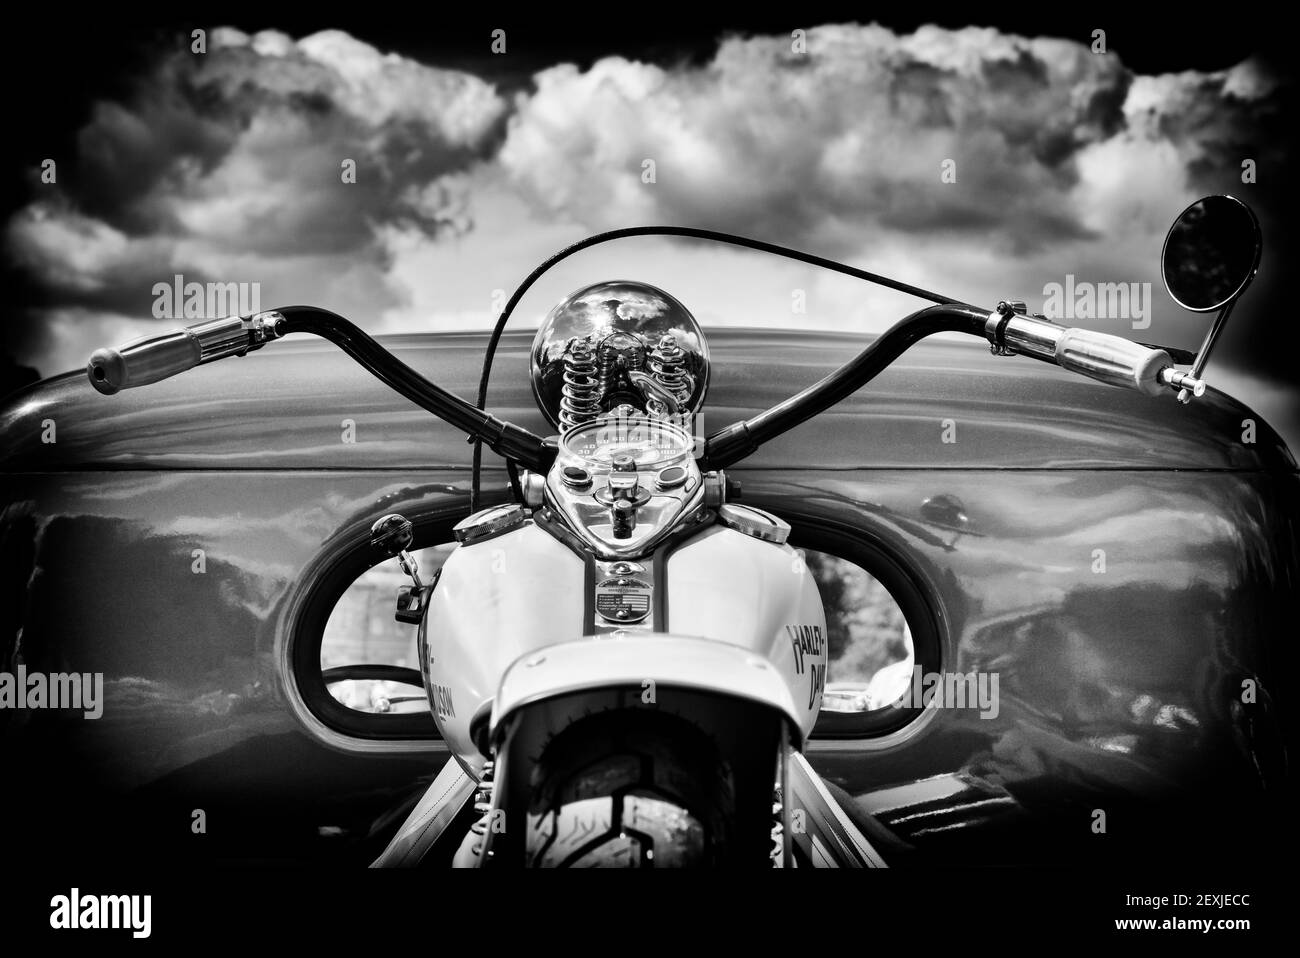 Vintage Harley Davidson Motorcycle on the back of an old chevrolet pick up truck. UK. Black and White Stock Photo